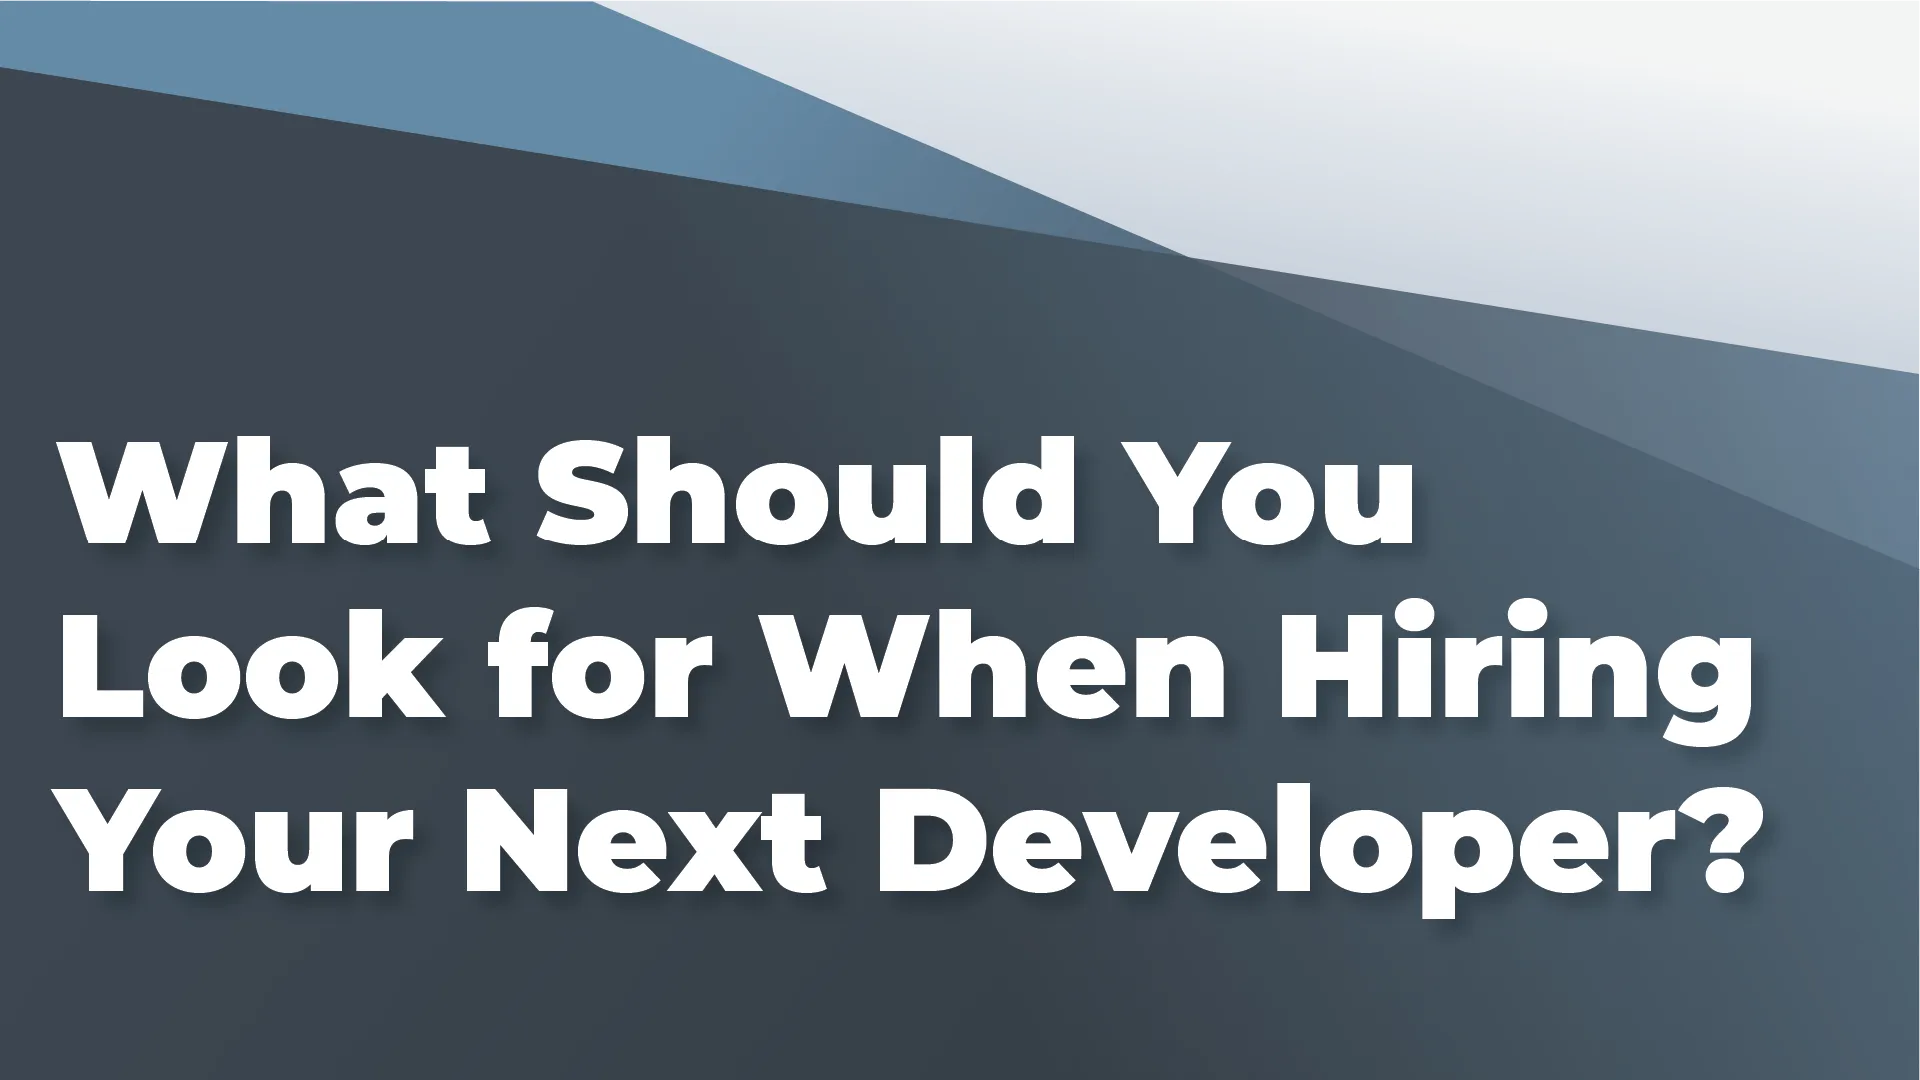 What Should You Look for When Hiring Your Next Developer?